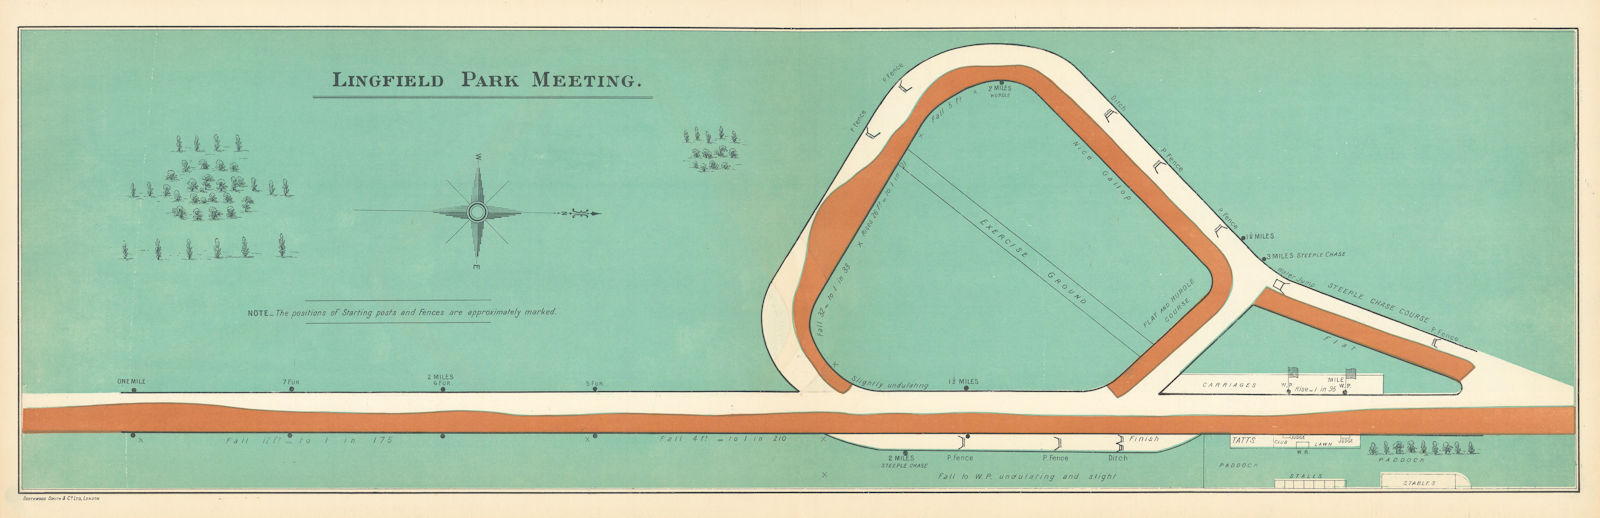 Lingfield Park Meeting racecourse, Surrey. BAYLES 1903 old antique map chart